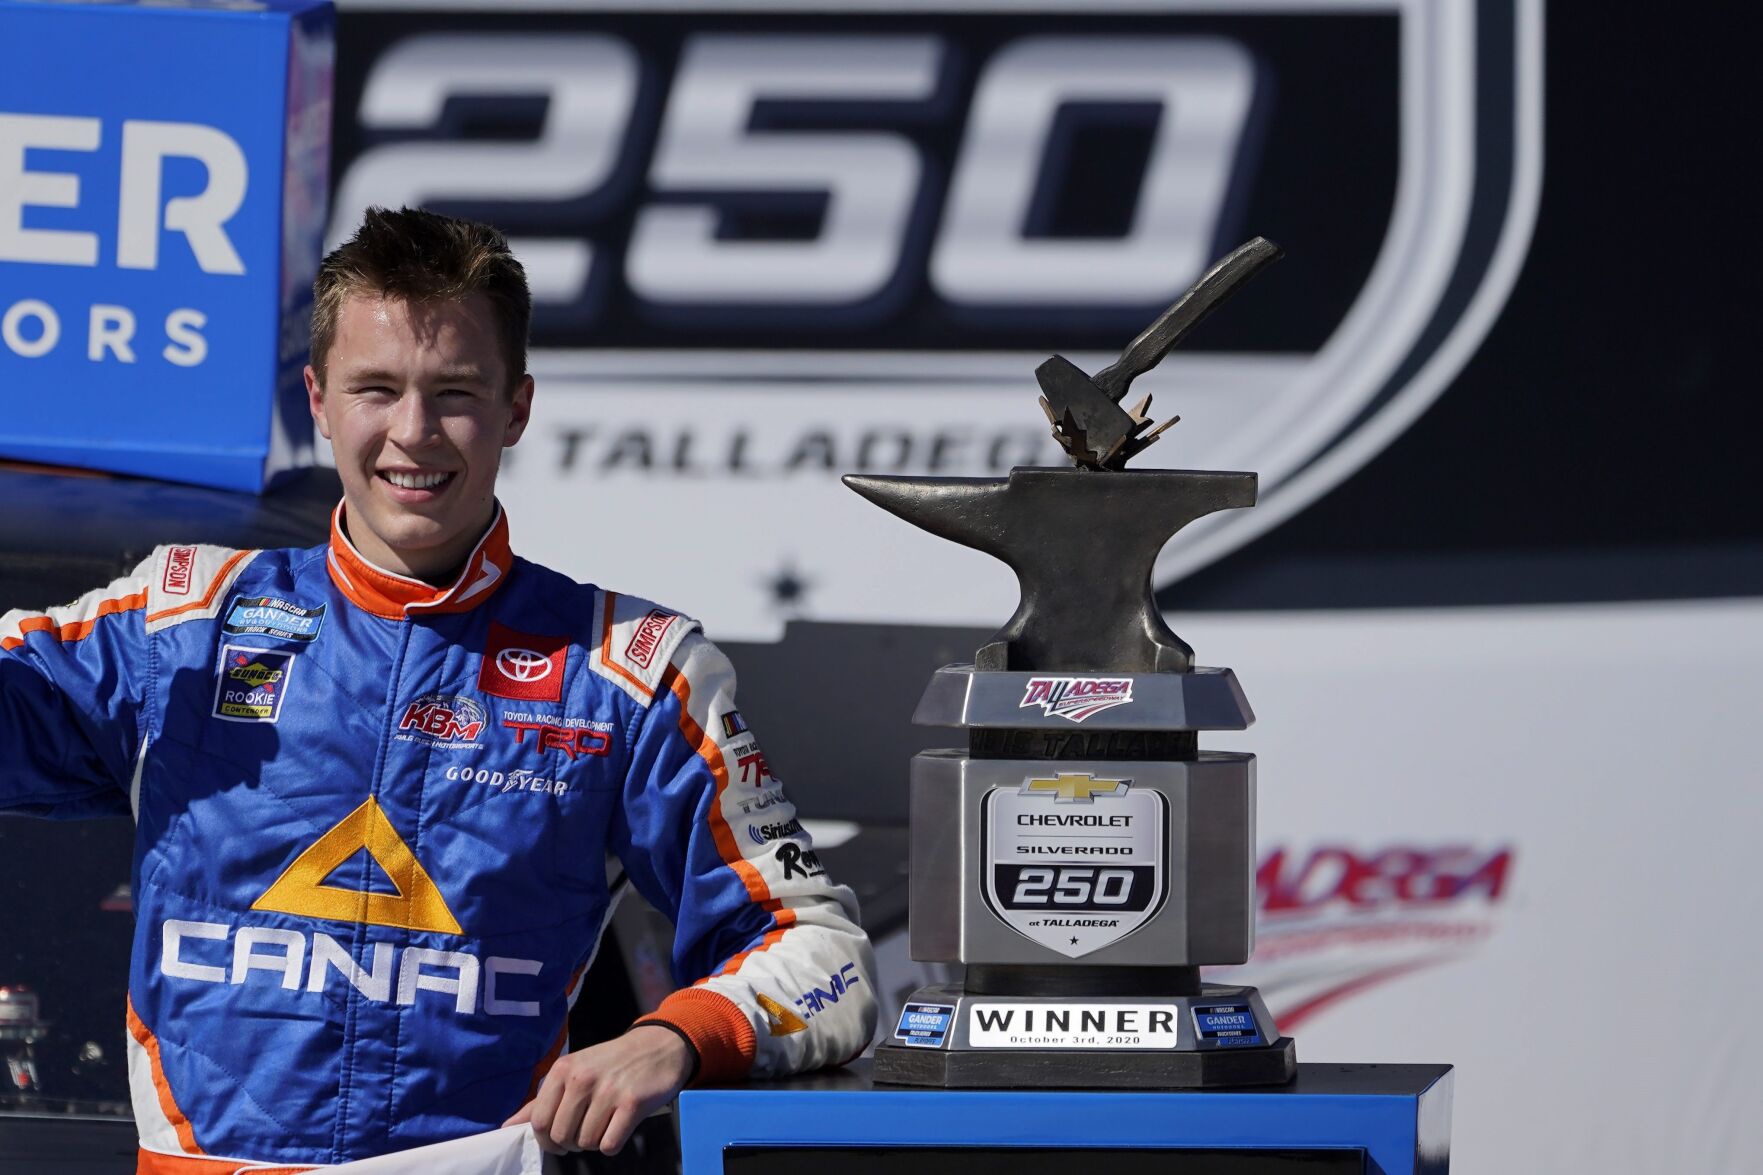 Canadian Raphael Lessard says first NASCAR win is a “dream come true”